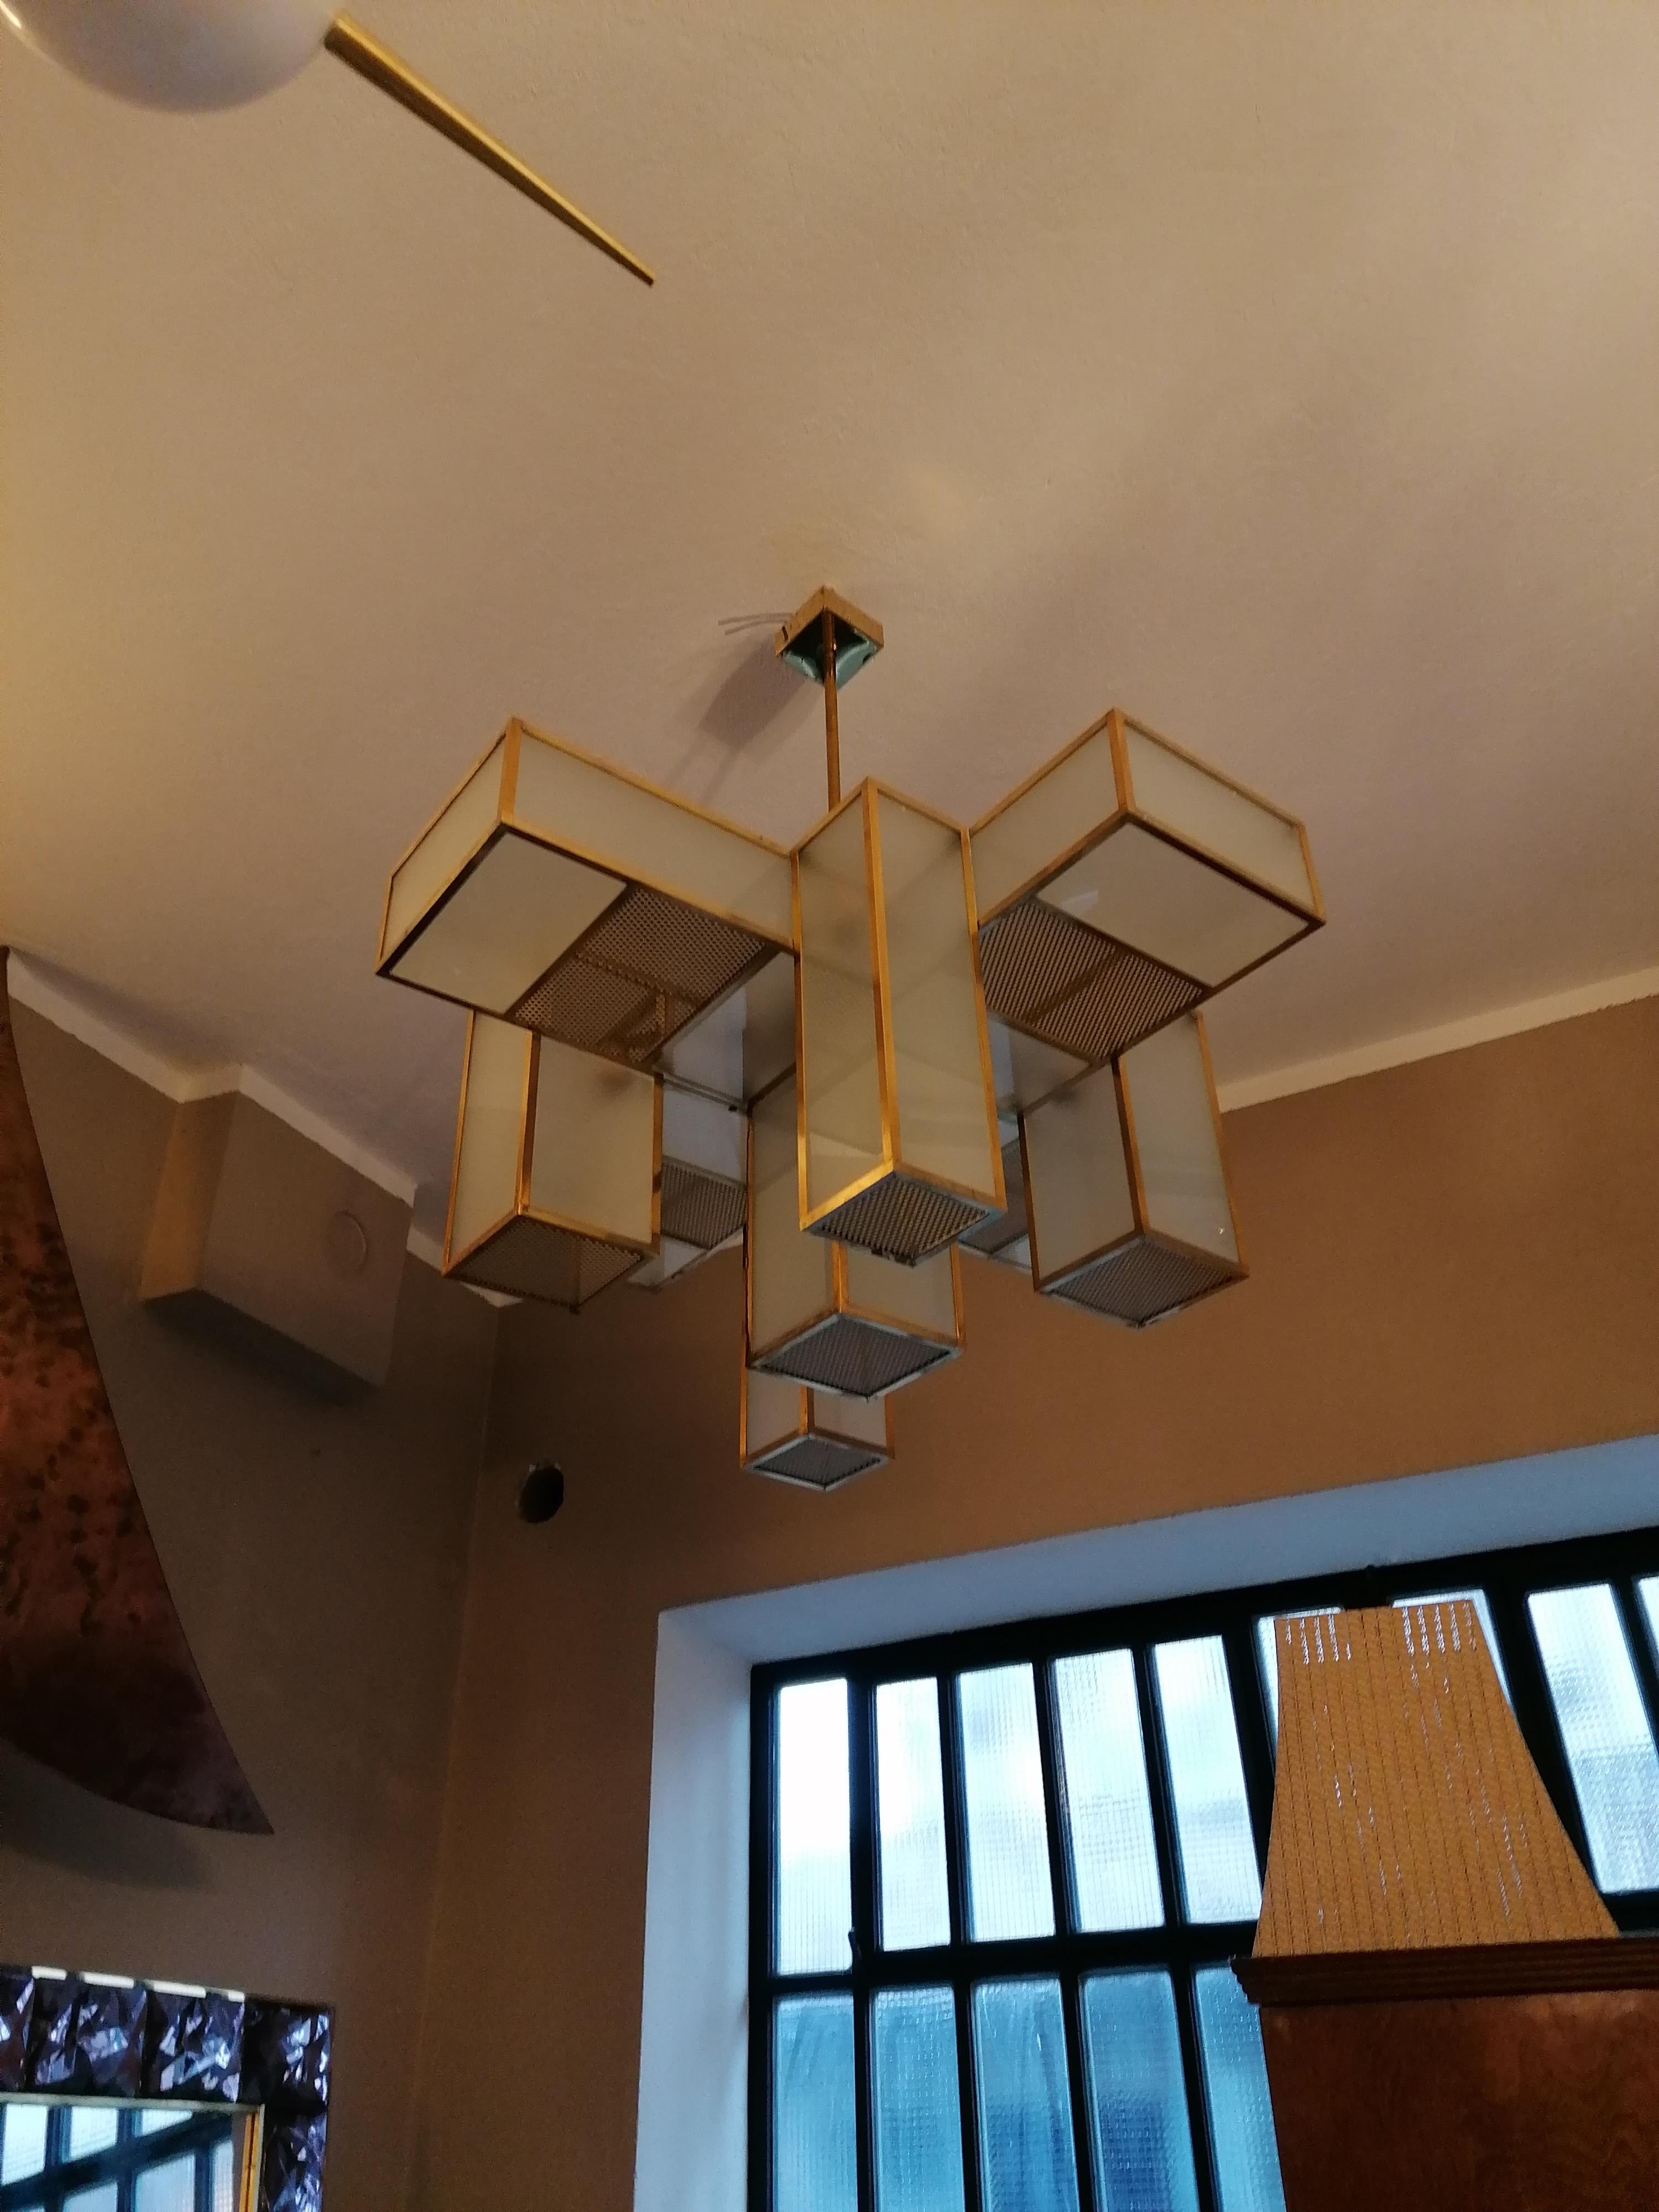 Spectacular huge ceiling lamp in a geometric design with 9 arms in all directions and downwards.
Brass frame with frosted glass.
To replace the bulbs the arms have a grid in the lower erea, which also increases the light failure. 
Original condtion,